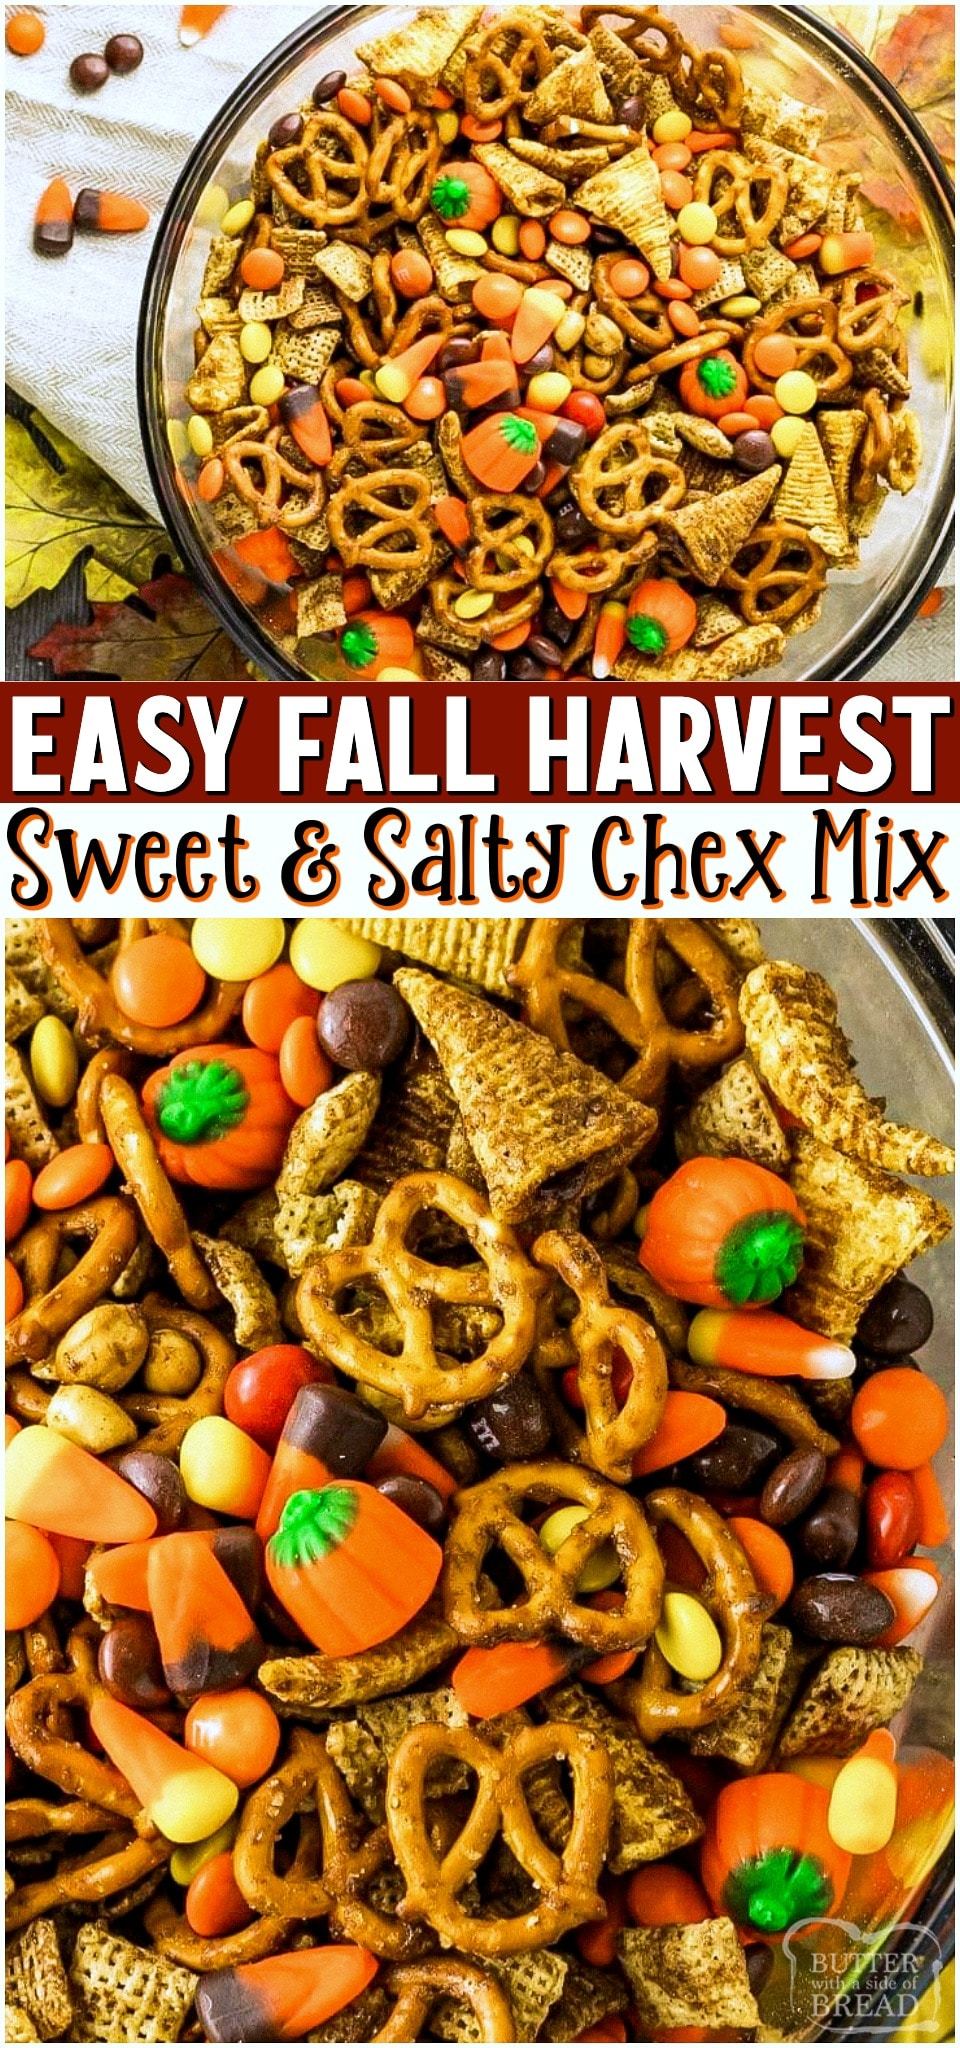 Harvest Chex Mix made with M&M's, pretzels, candy corn & more! Mix tossed in pumpkin spiced butter then baked for the perfect crunch. Perfectly simple sweet & salty Fall treat! #chex #chexmix #sweet #salty #Fall #Harvest #recipe from BUTTER WITH A SIDE OF BREAD